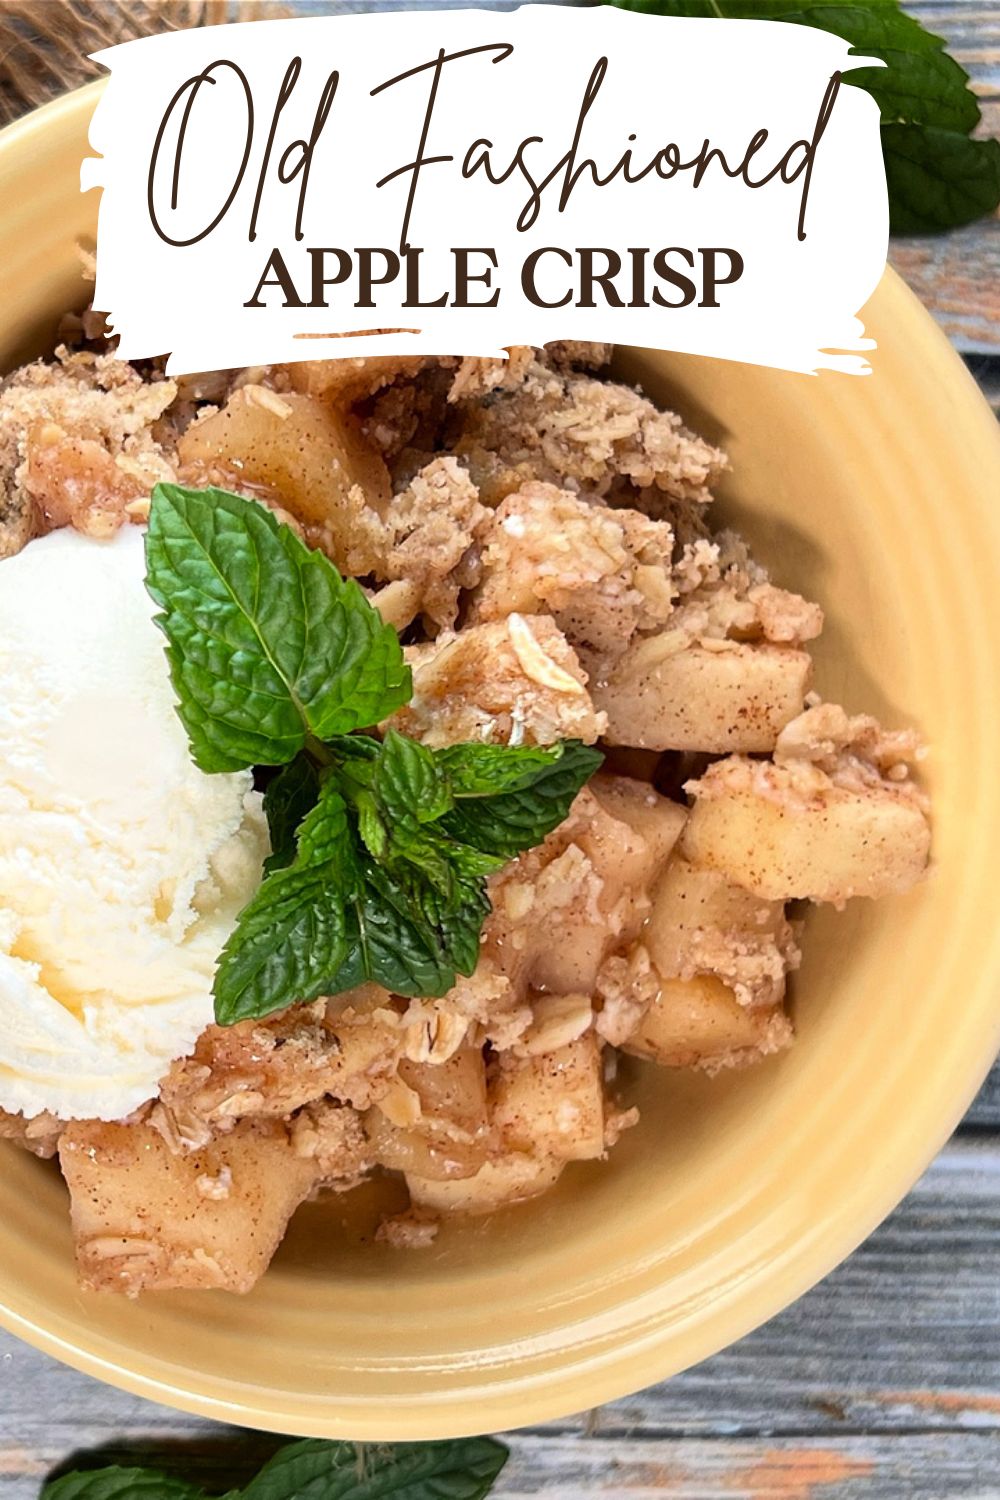 Old Fashioned Apple Crisp with Oat Topping via @preventionrd